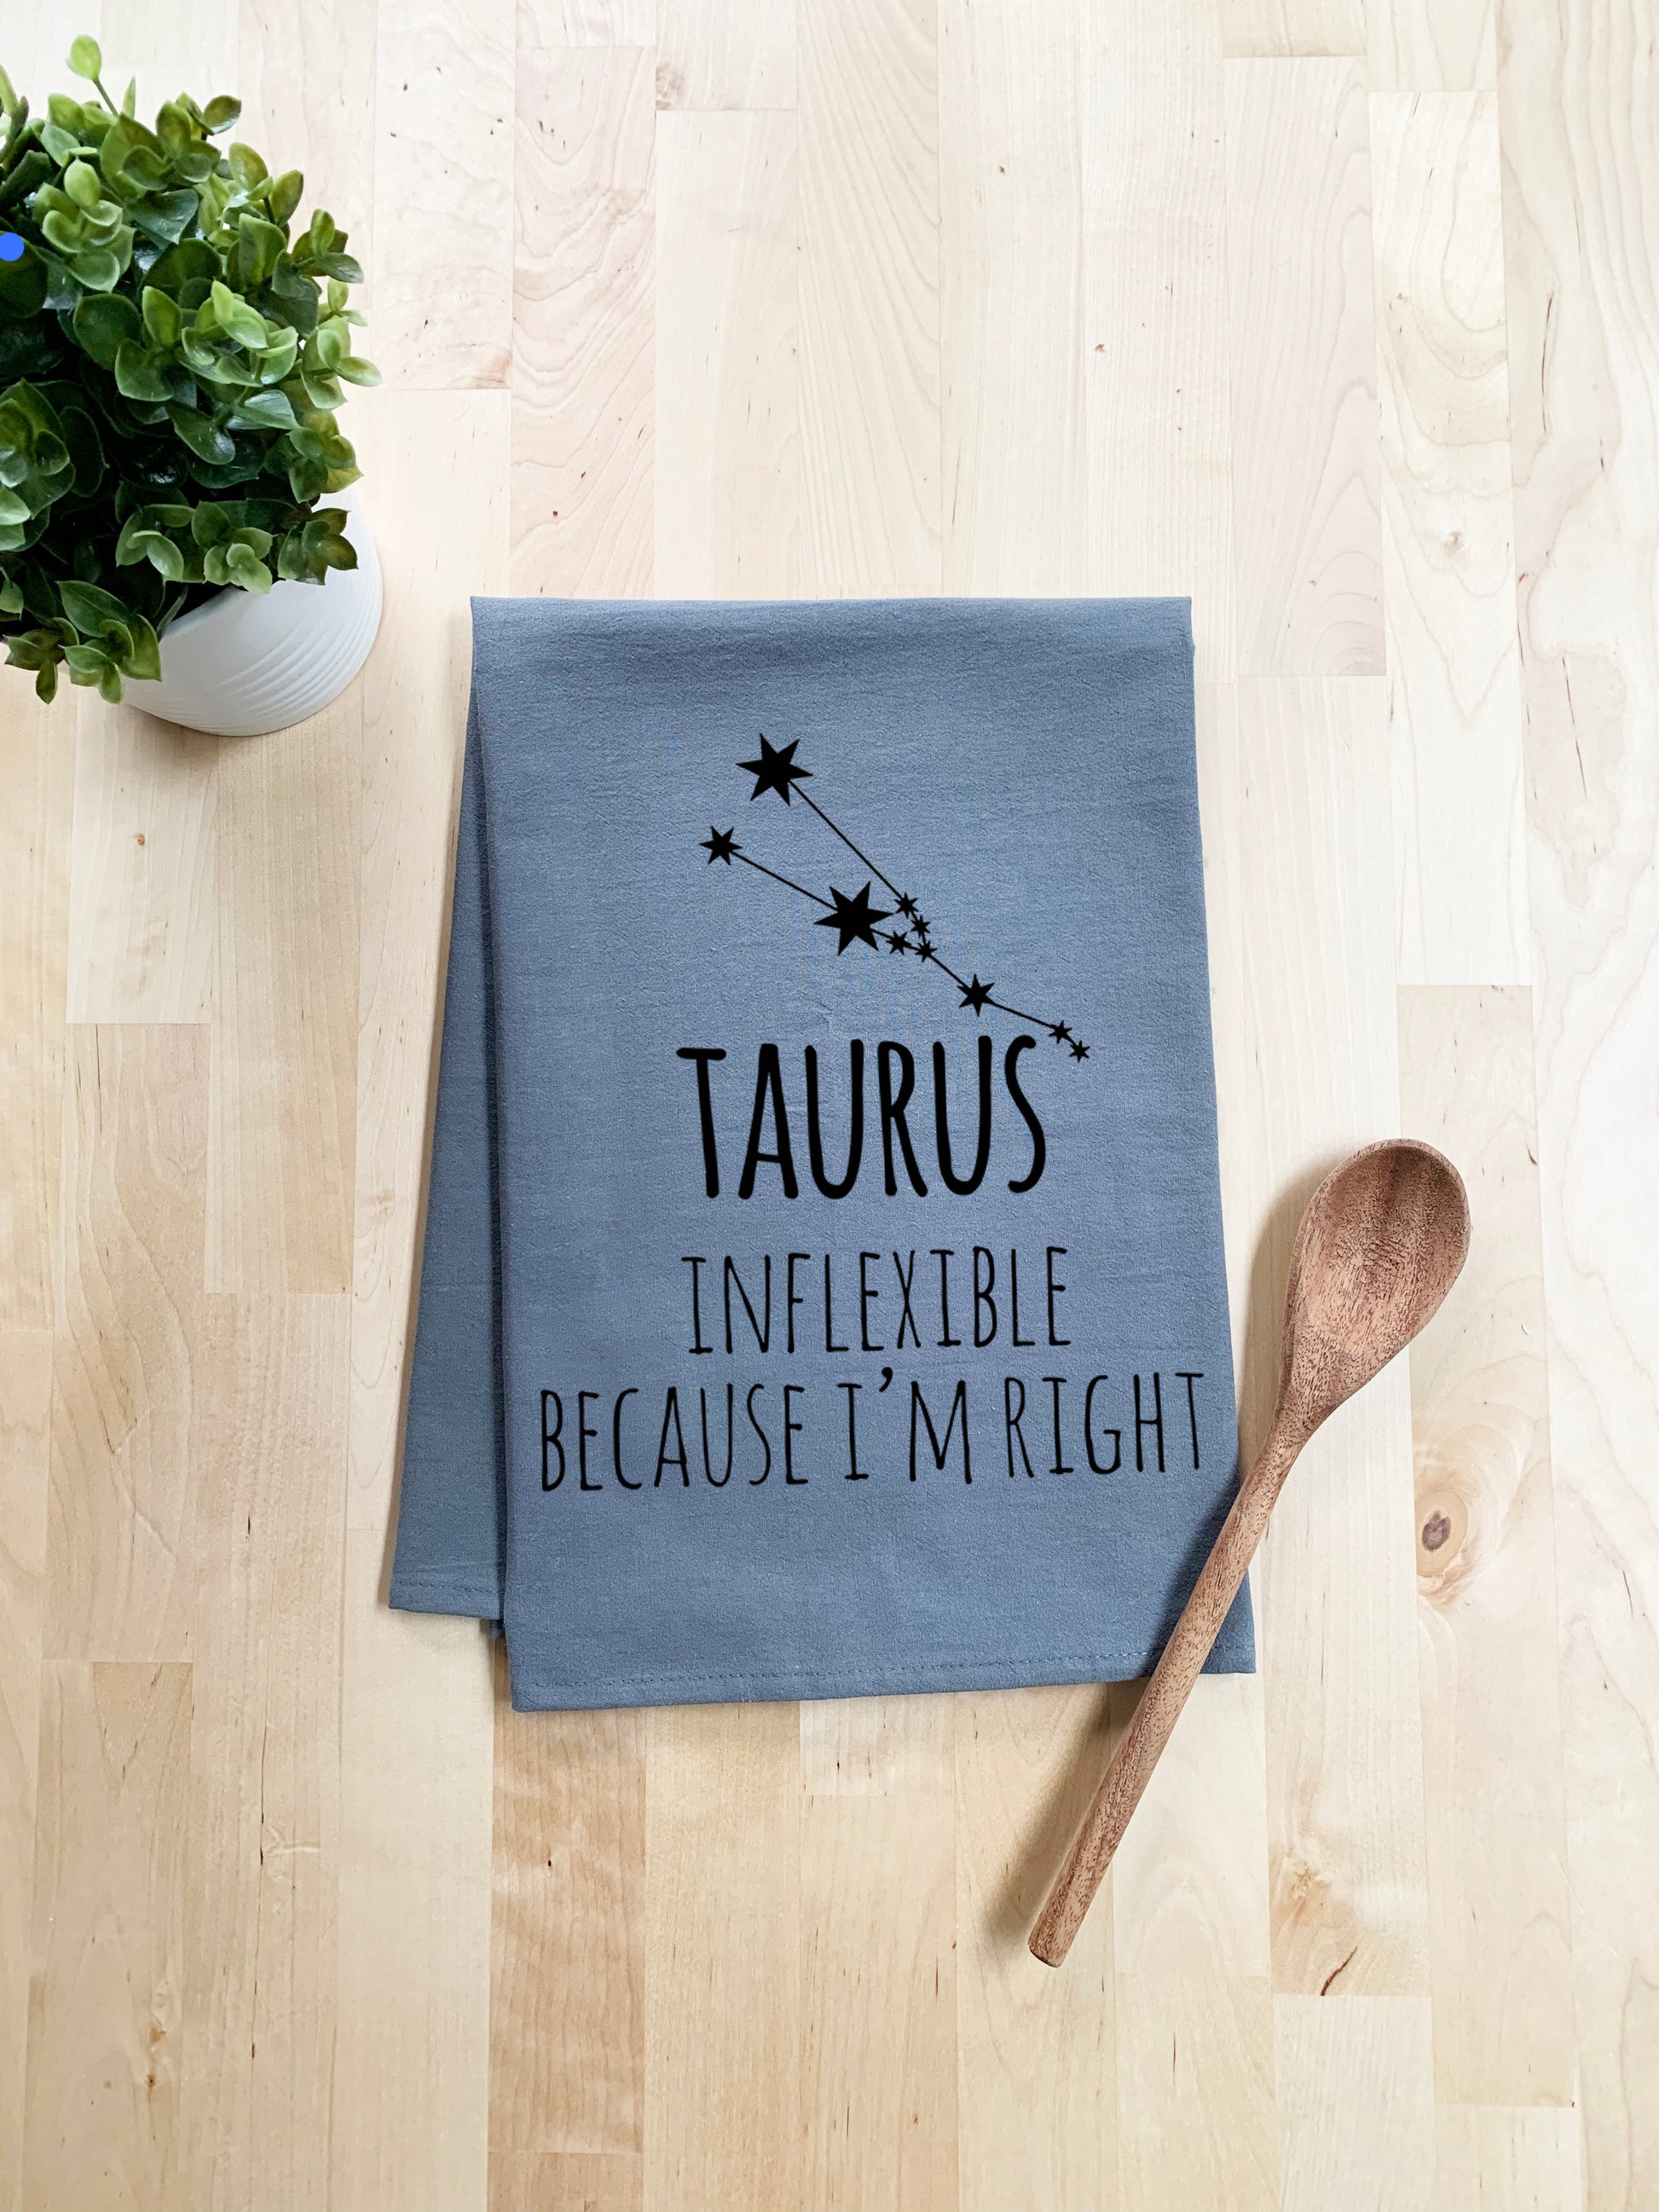 Taurus Zodiac (Inflexible Because I'm Right) Dish Towel - White Or Gray - MoonlightMakers